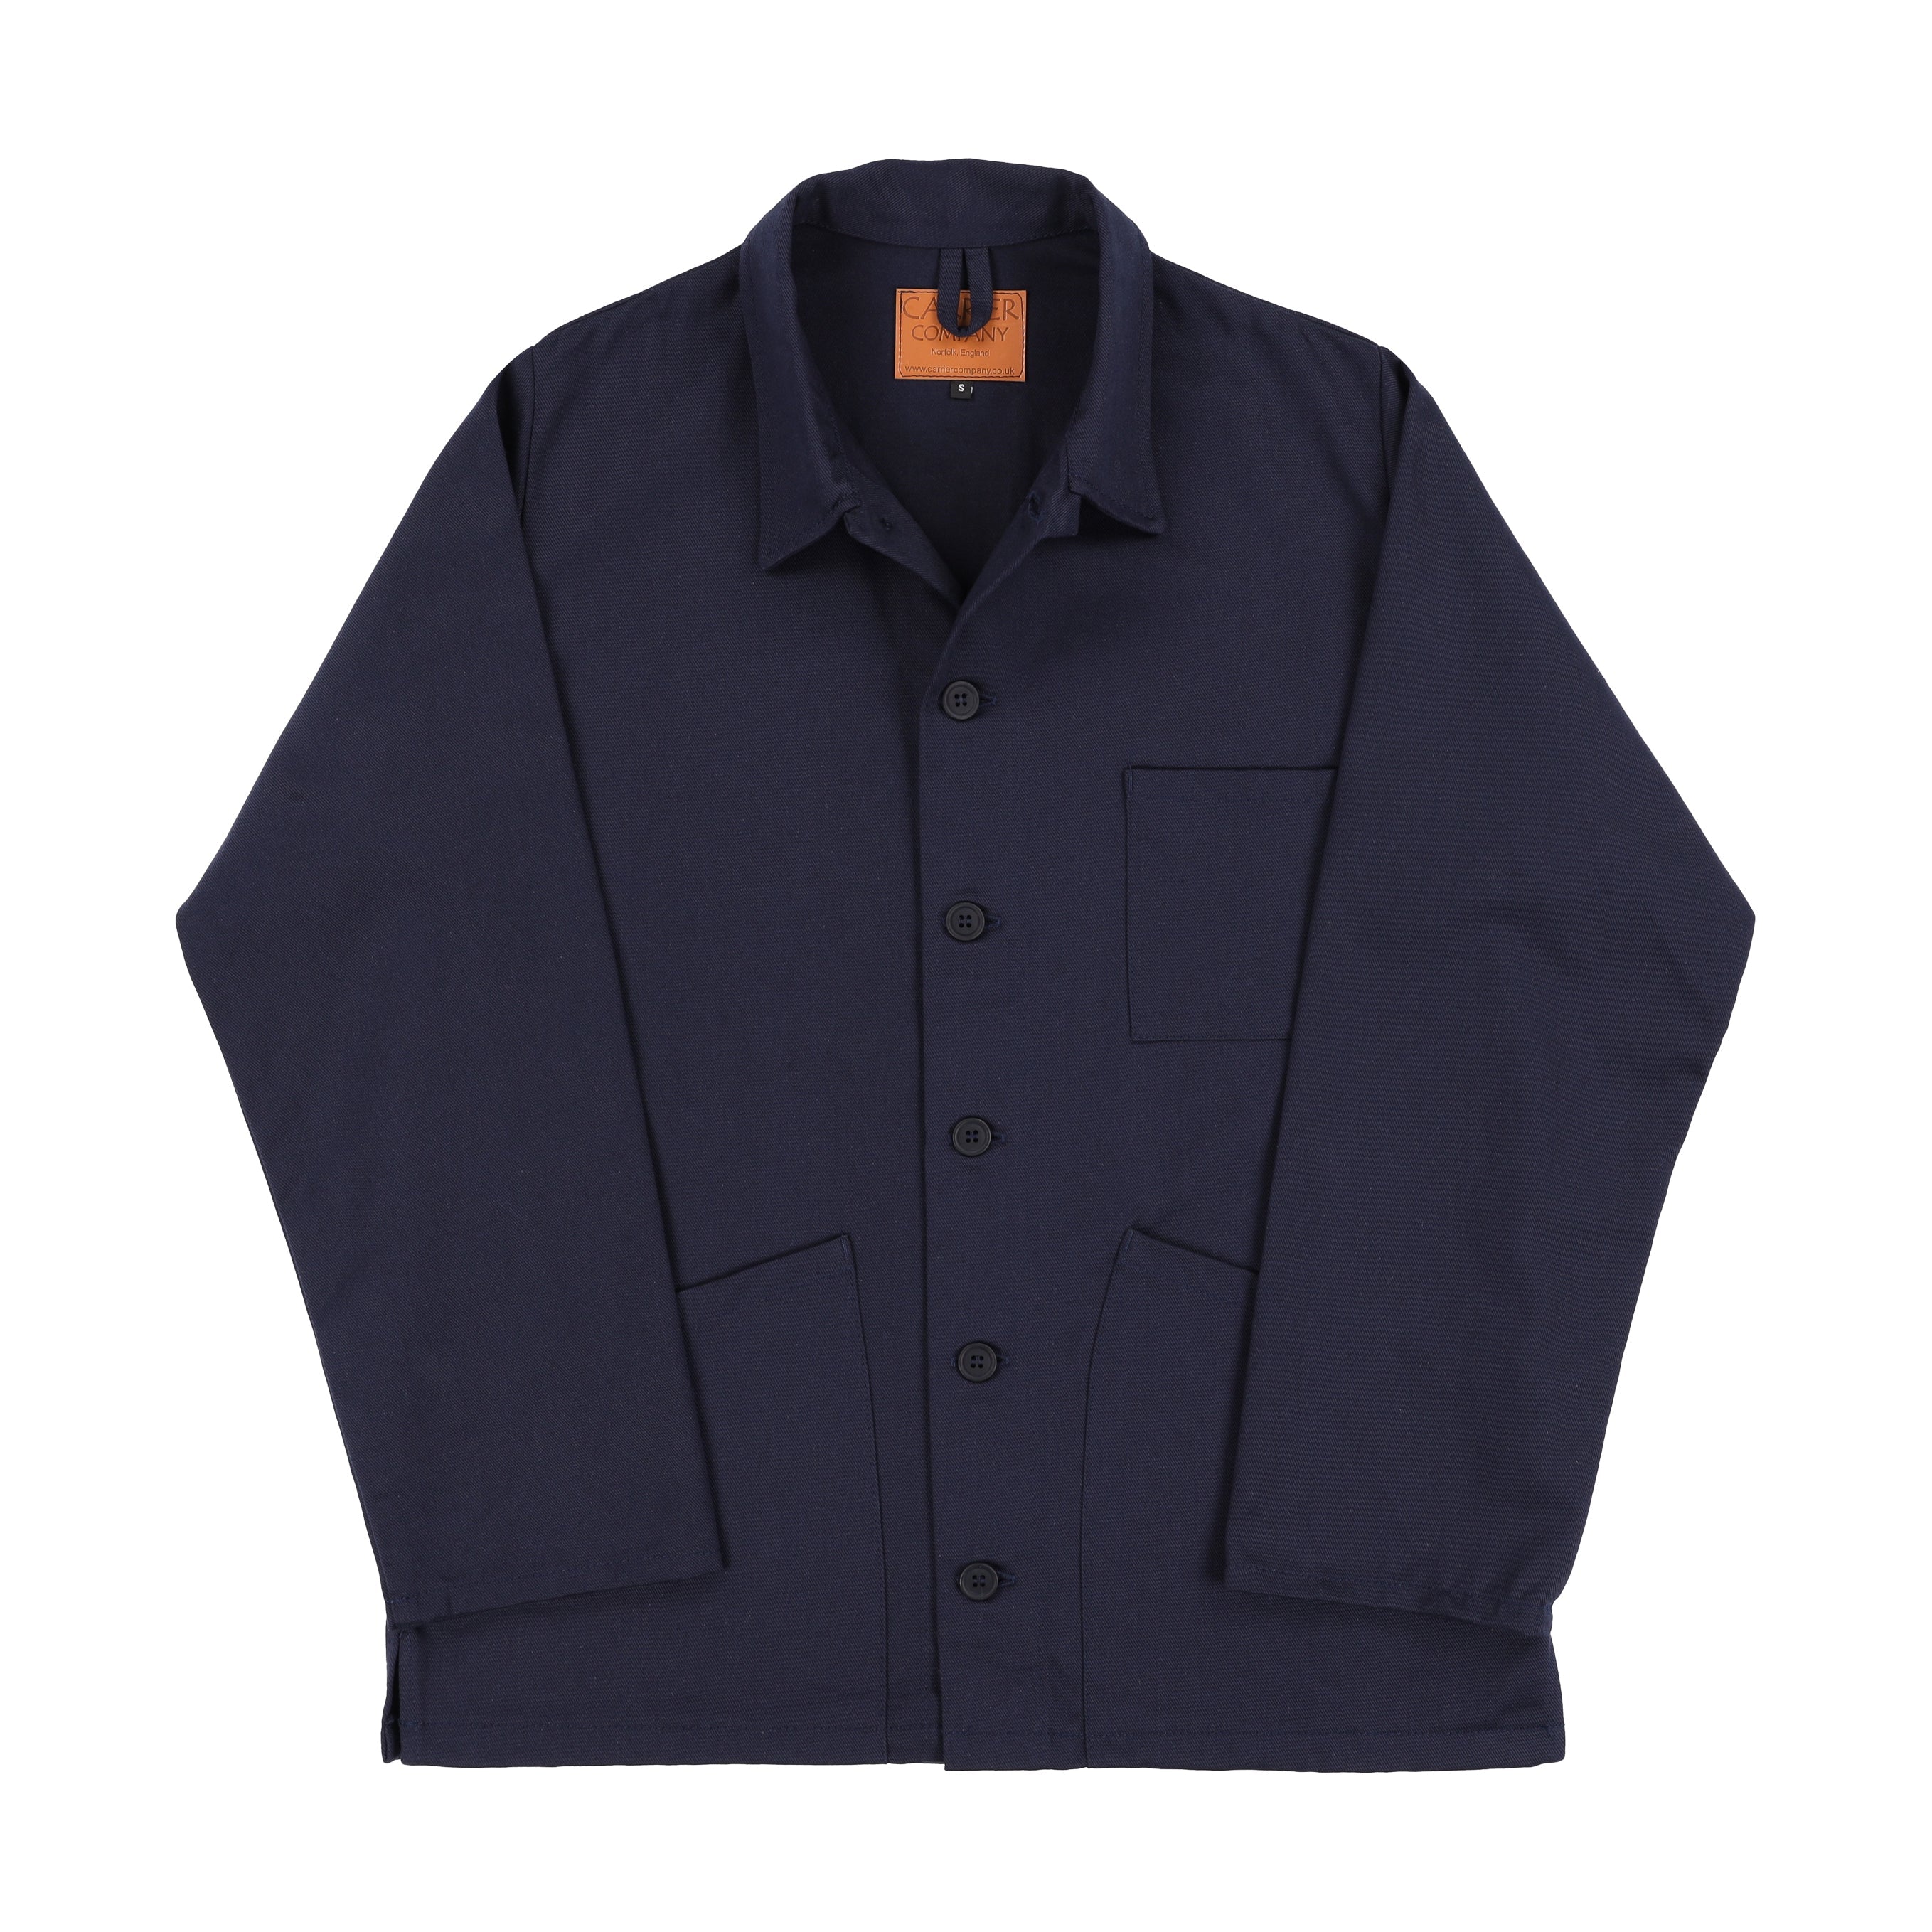 Carrier Company Traditional Norfolk Work Jacket in Navy